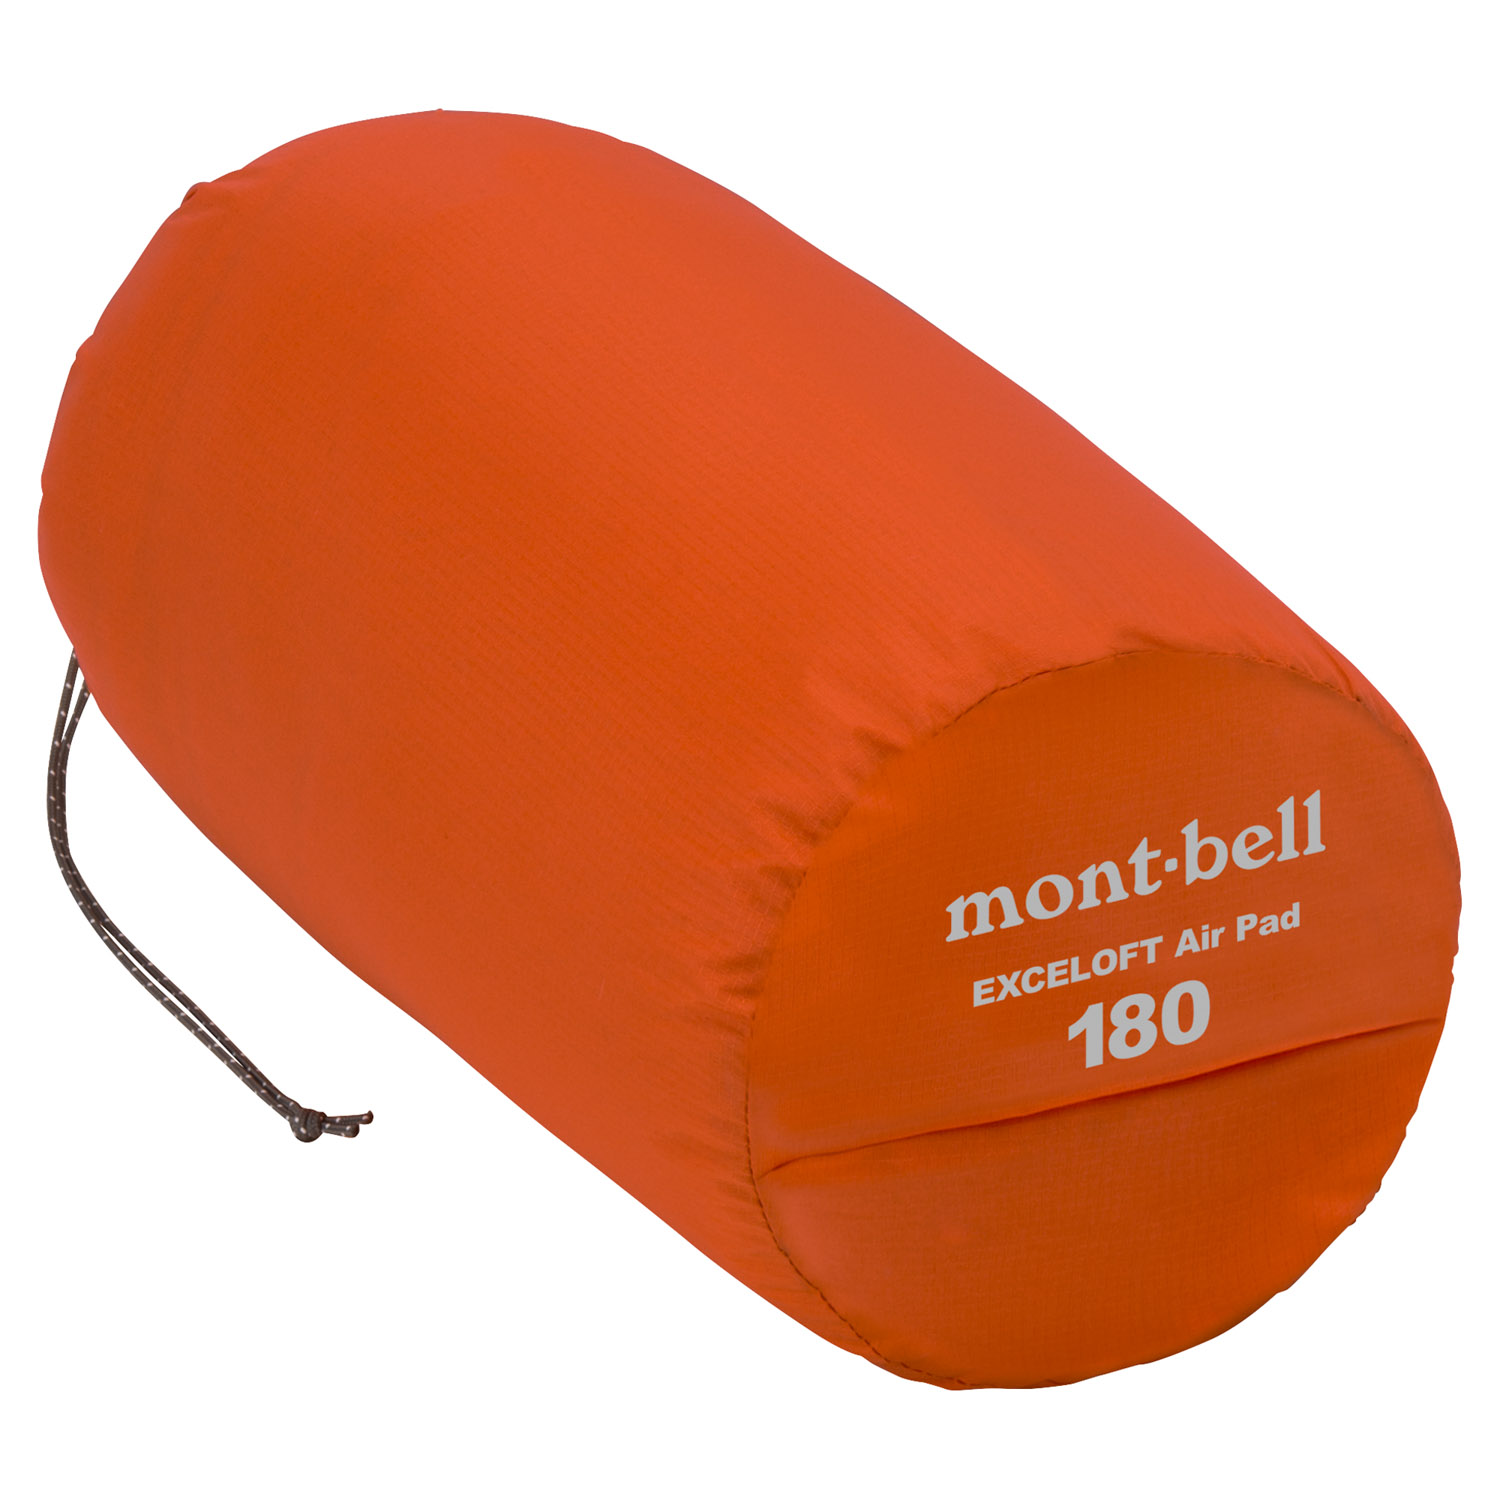 EXCELOFT Air Pad 180 | Montbell Euro